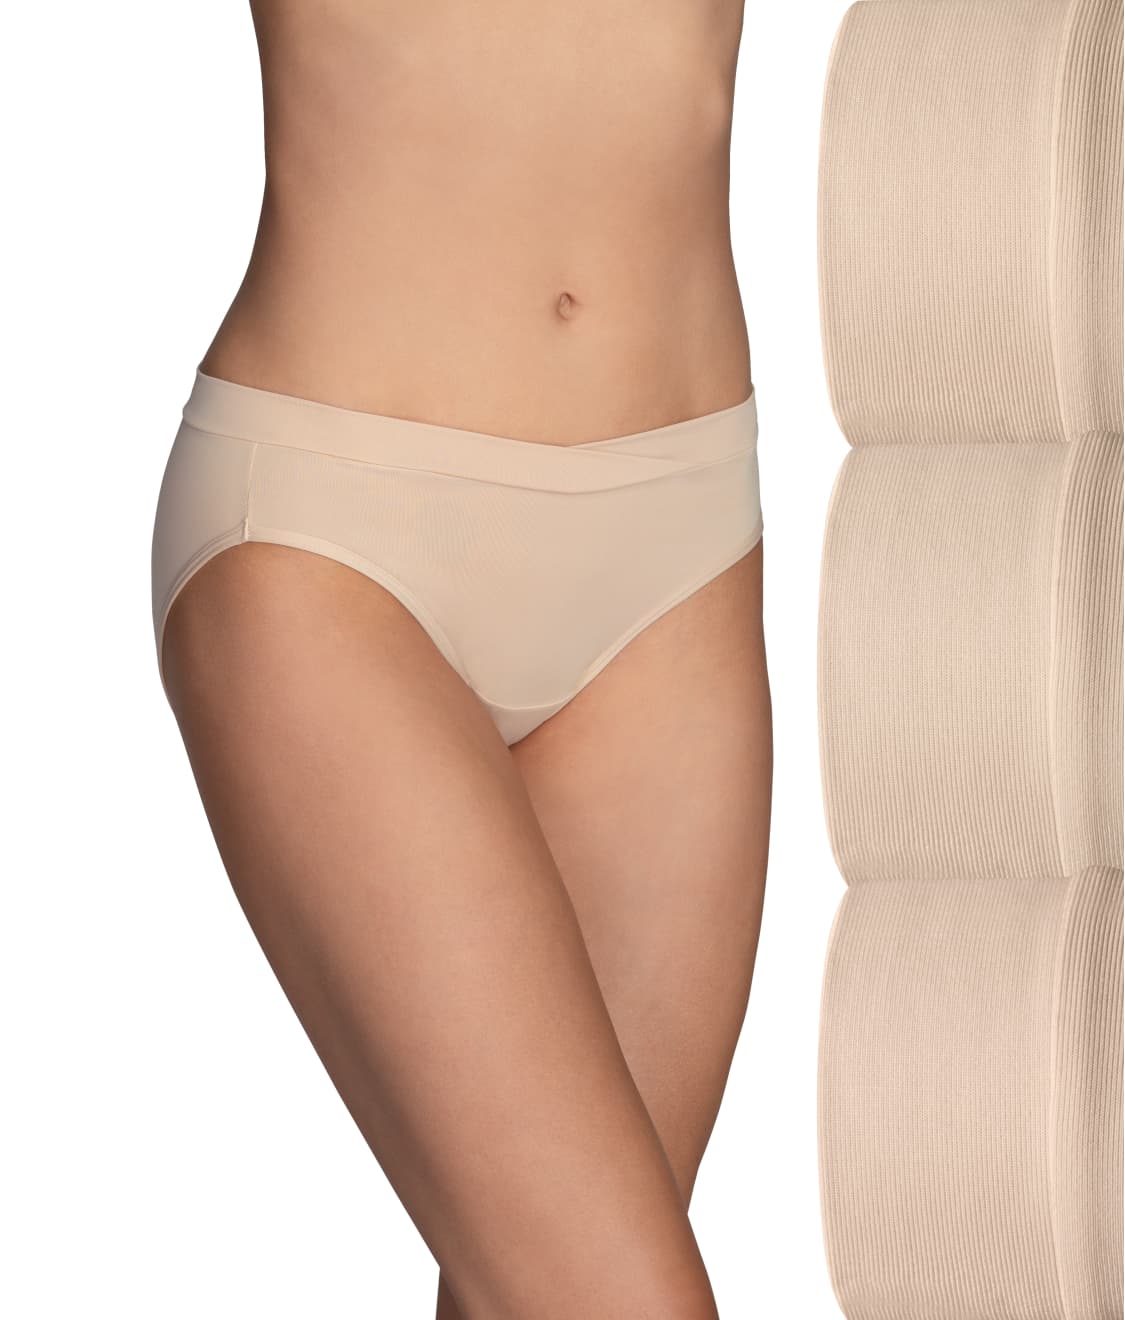 Shapewear, Lingerie Solutions, Neutral Chic Pajamas and Sleepwear